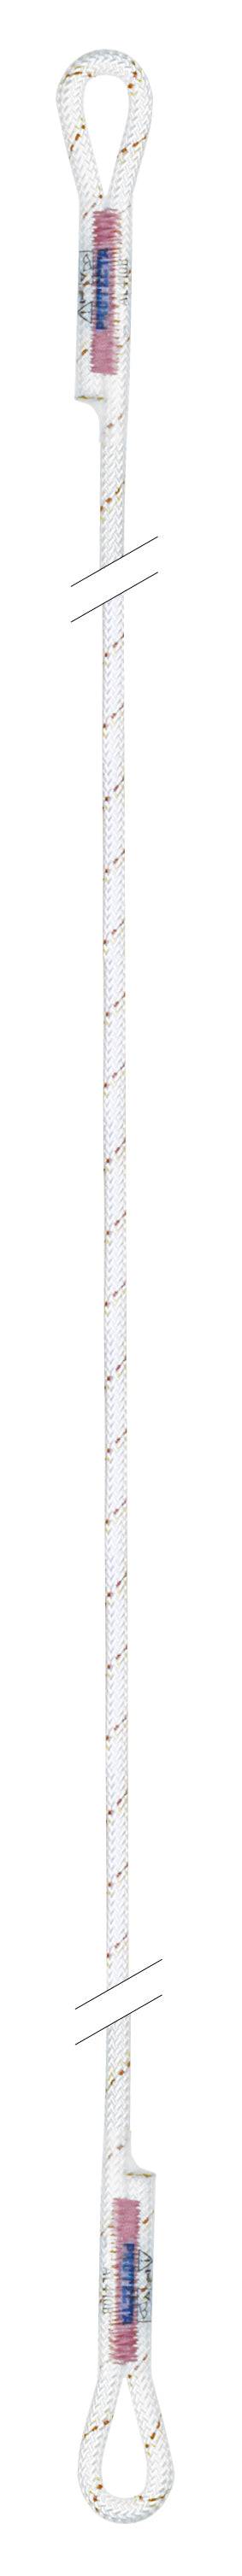 3M Protecta 2m Single Leg Rope Work Positioning Lanyard with Loops AL420B - SecureHeights